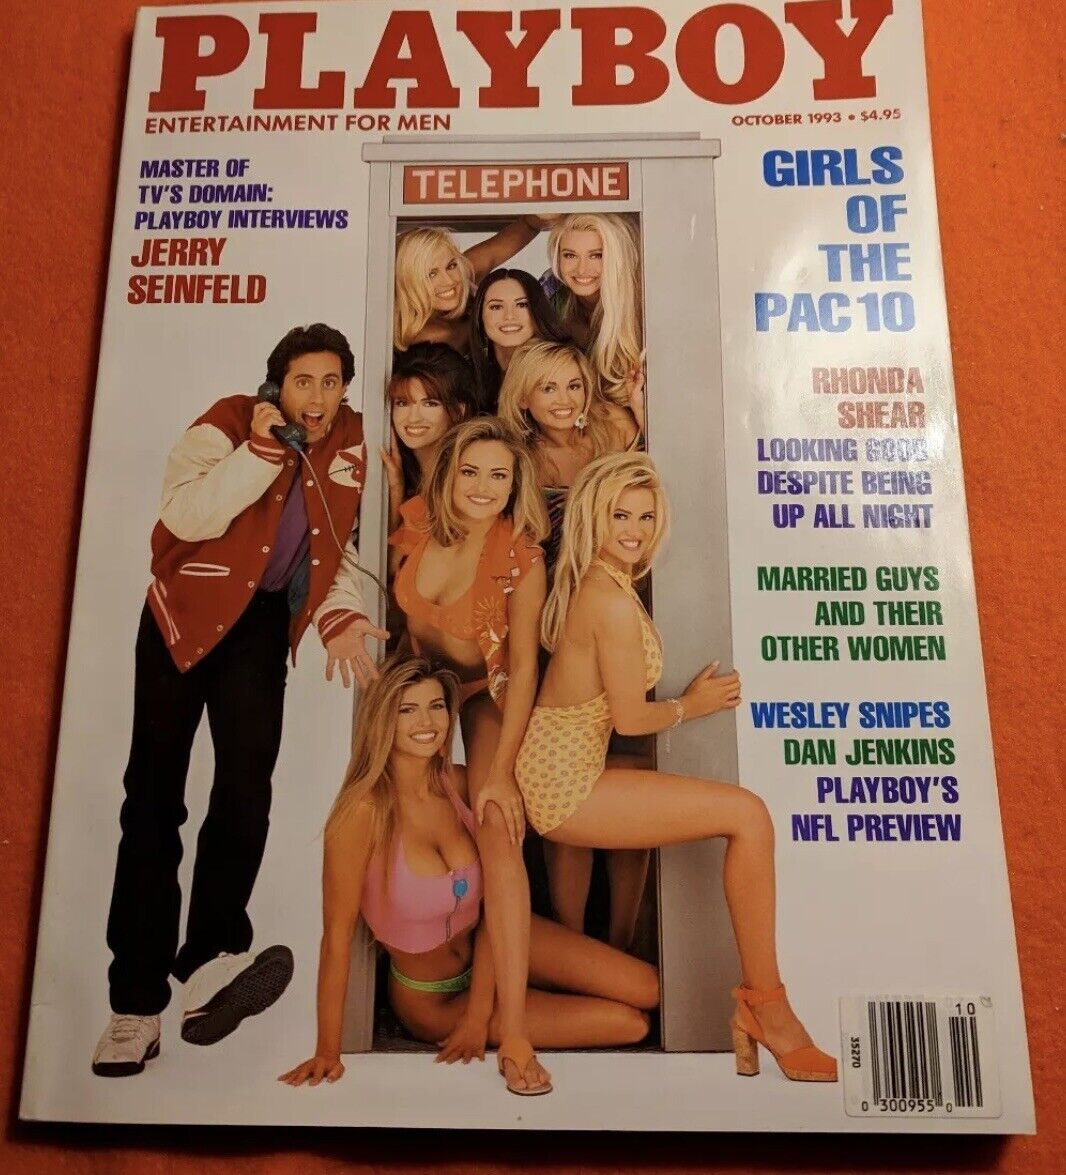 Playboy October 1993 - Jerry Seinfeld - Jenny McCarthy - Girls of the PAC 10